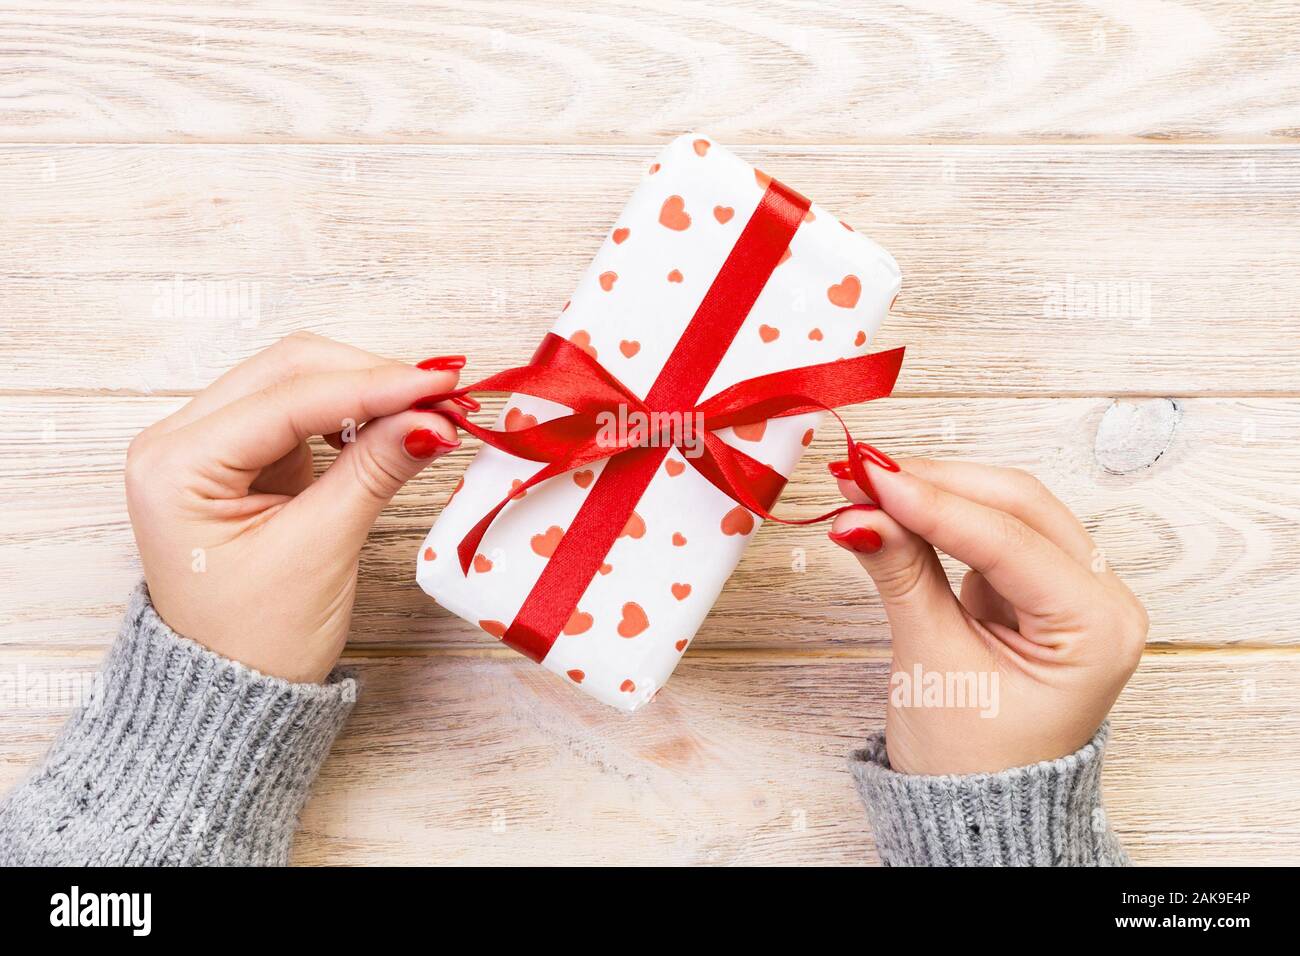 Woman Hands Give Wrapped Valentine Or Other Holiday Handmade Present In Paper With Red Ribbon Present Box Red Heart Decoration Of Gift On Wooden Tab Stock Photo Alamy